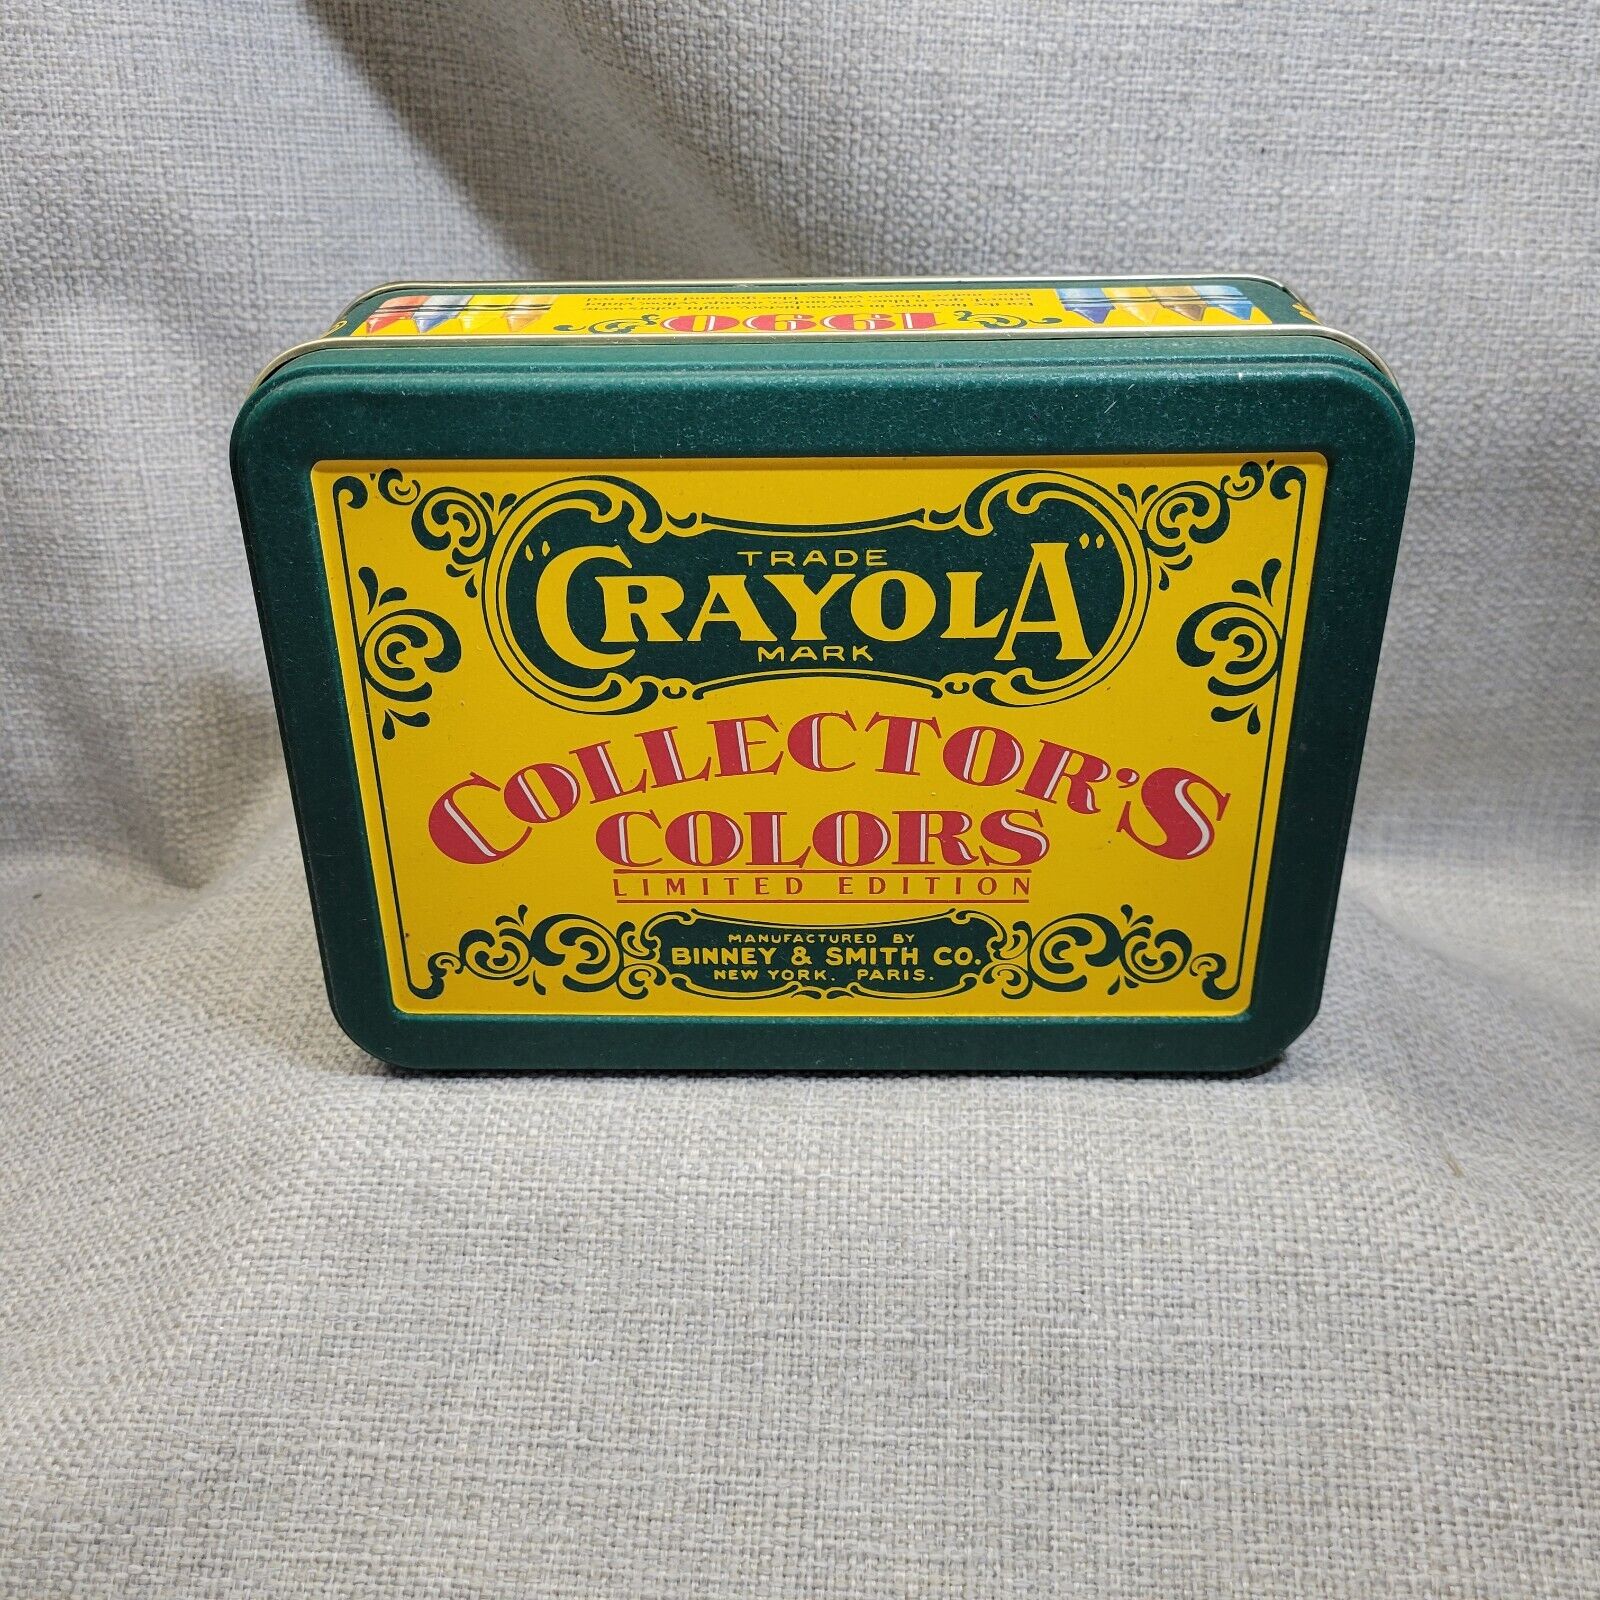 Vintage Crayola Collectors Colors Limited Edition 1991 Metal Tin with Crayons